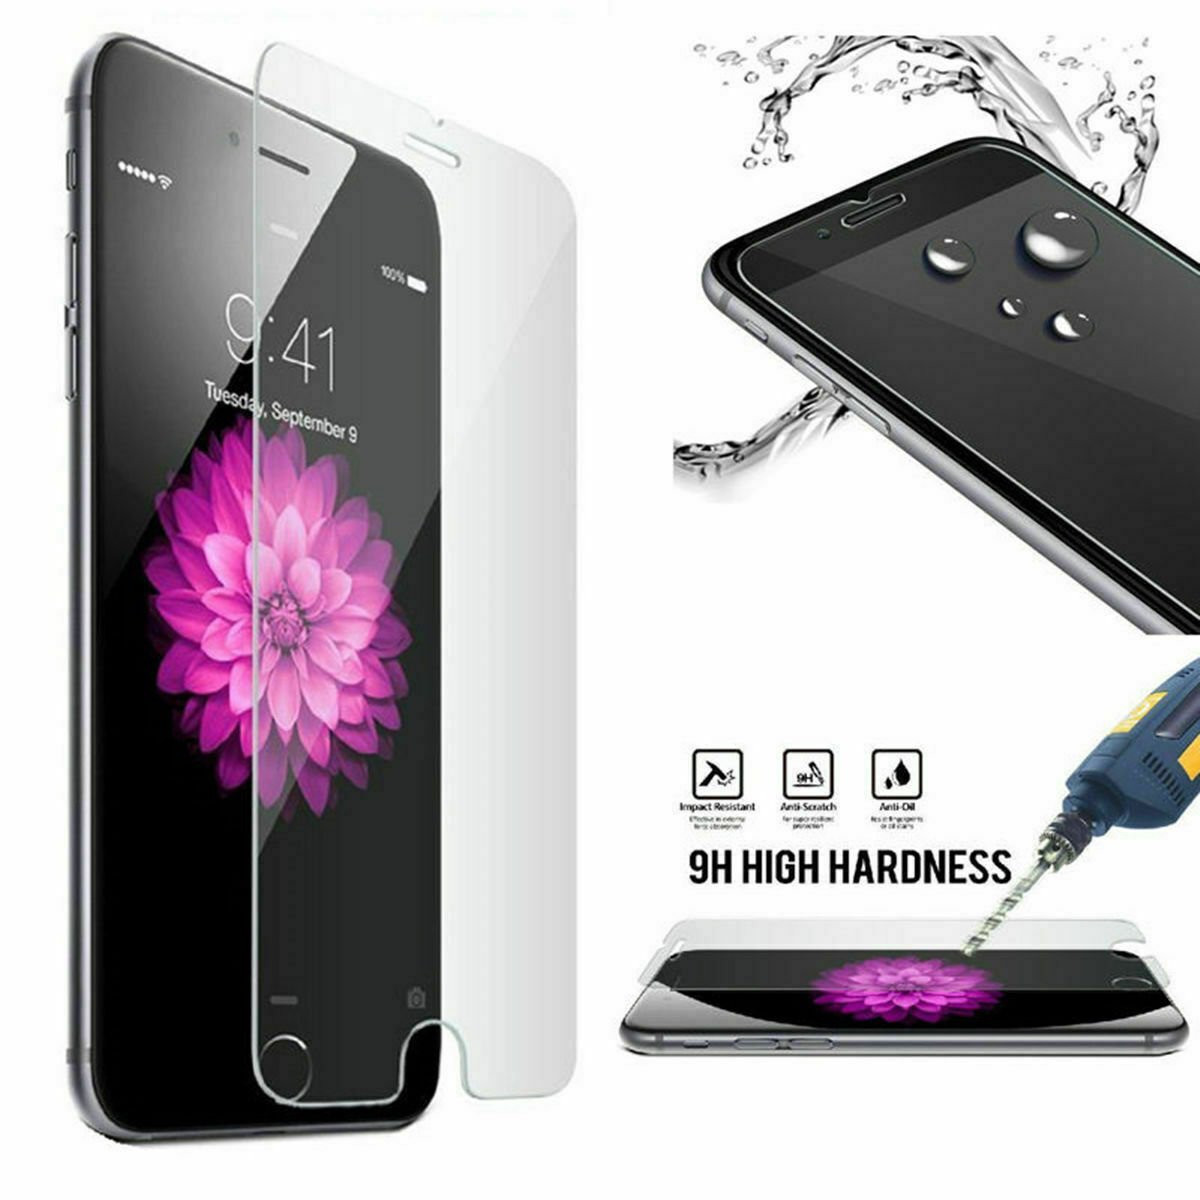 Premium Real Screen Protector Tempered Glass For iPhone 6 6s 7 8 Plus SE